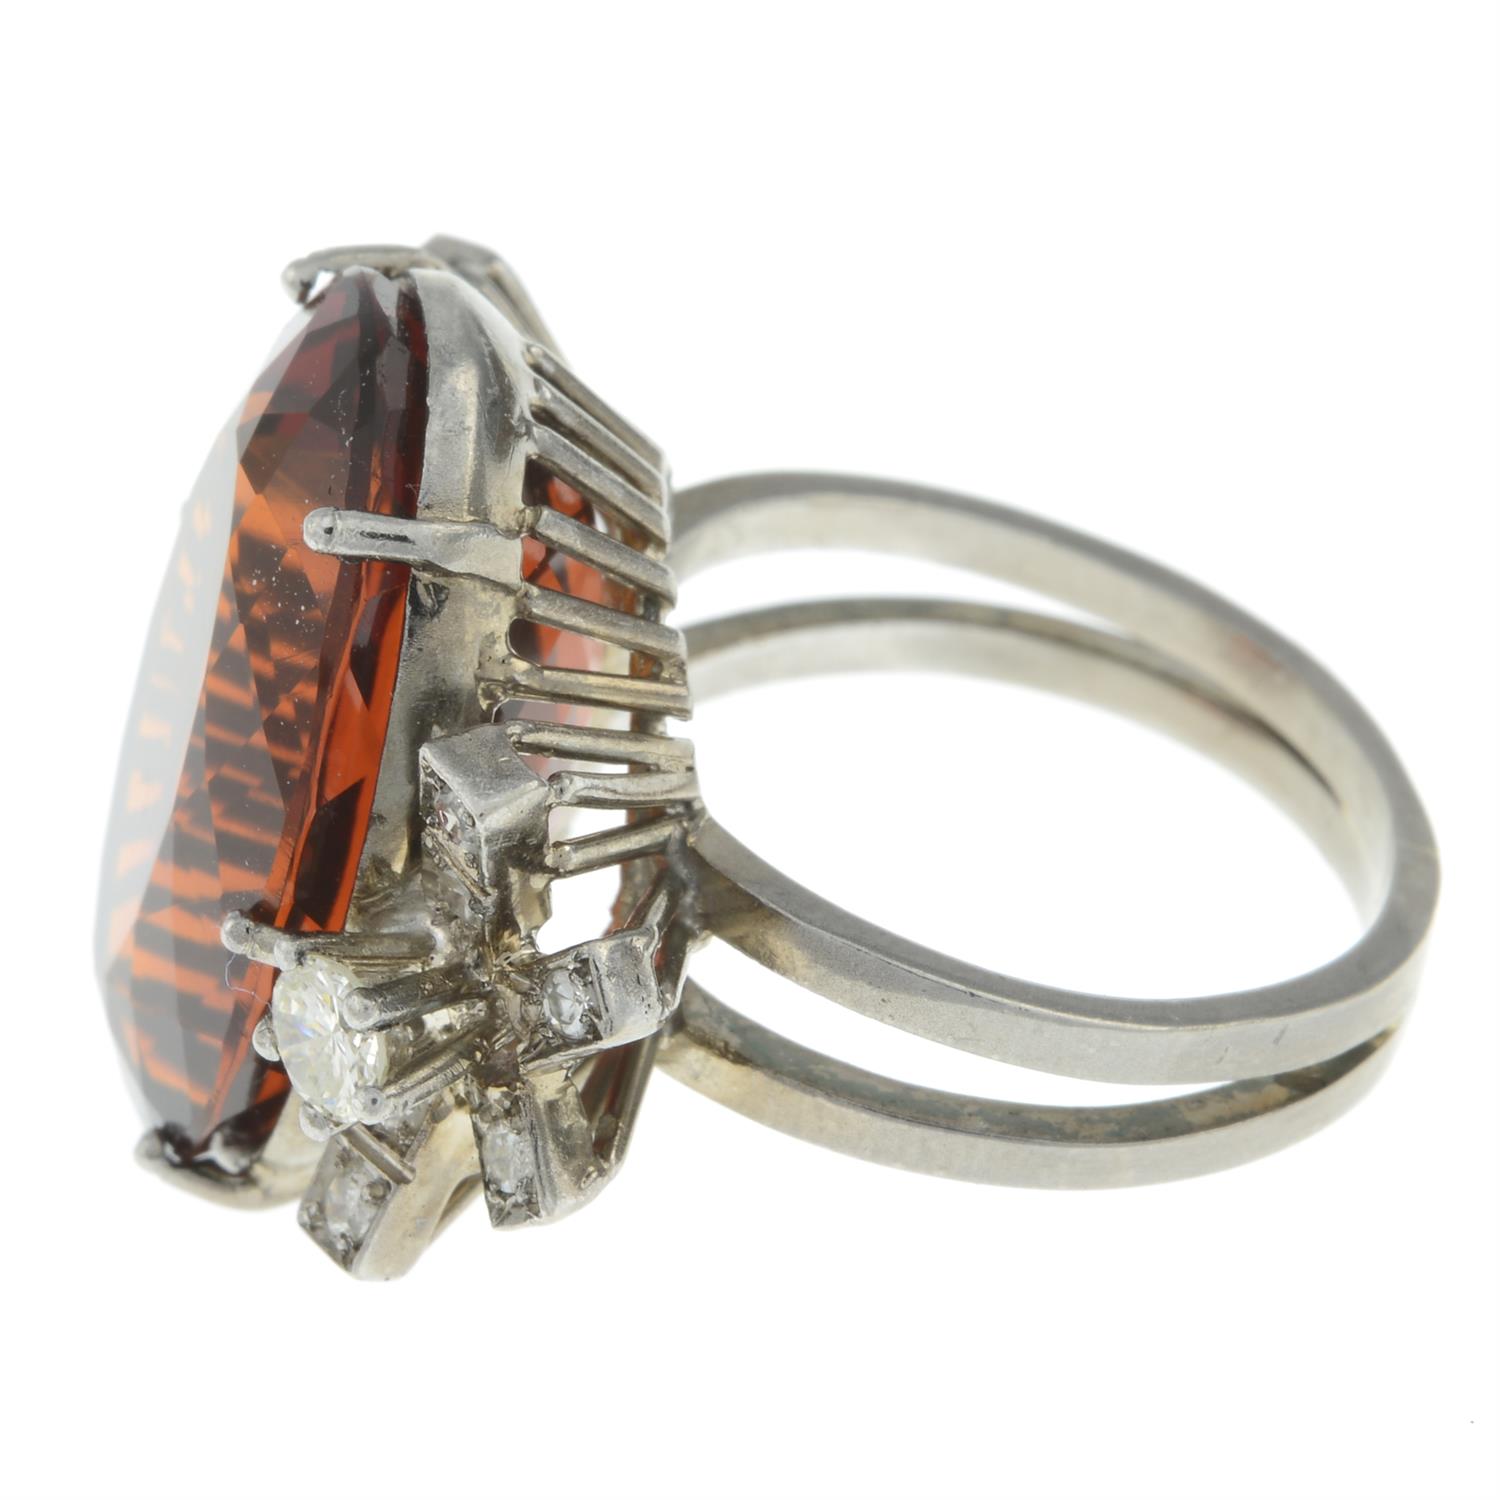 Mid 20th century gold citrine and diamond ring - Image 4 of 5